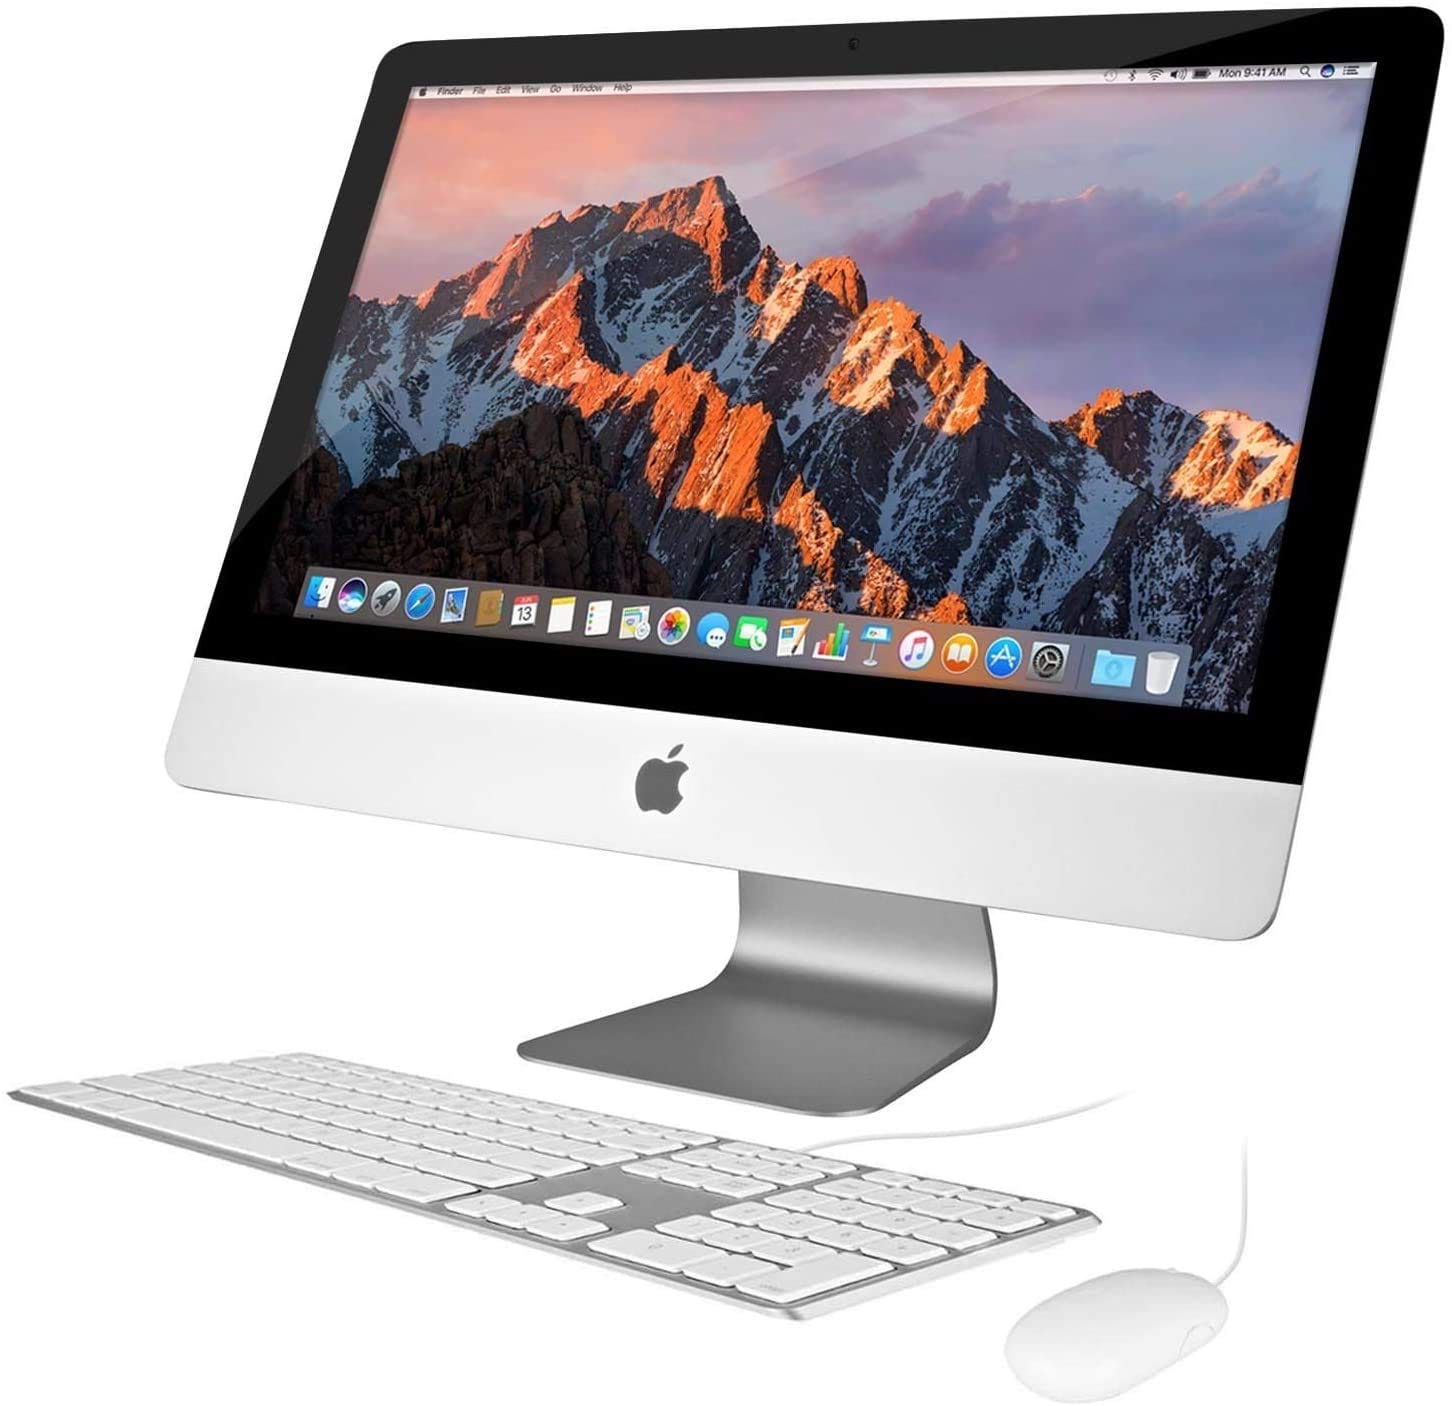 SmartTechShopping desktop computer iMac 21.5in with 16GB RAM, 1TB HDD, and MacOS Sierra 10.12 - All-in-One Desktop